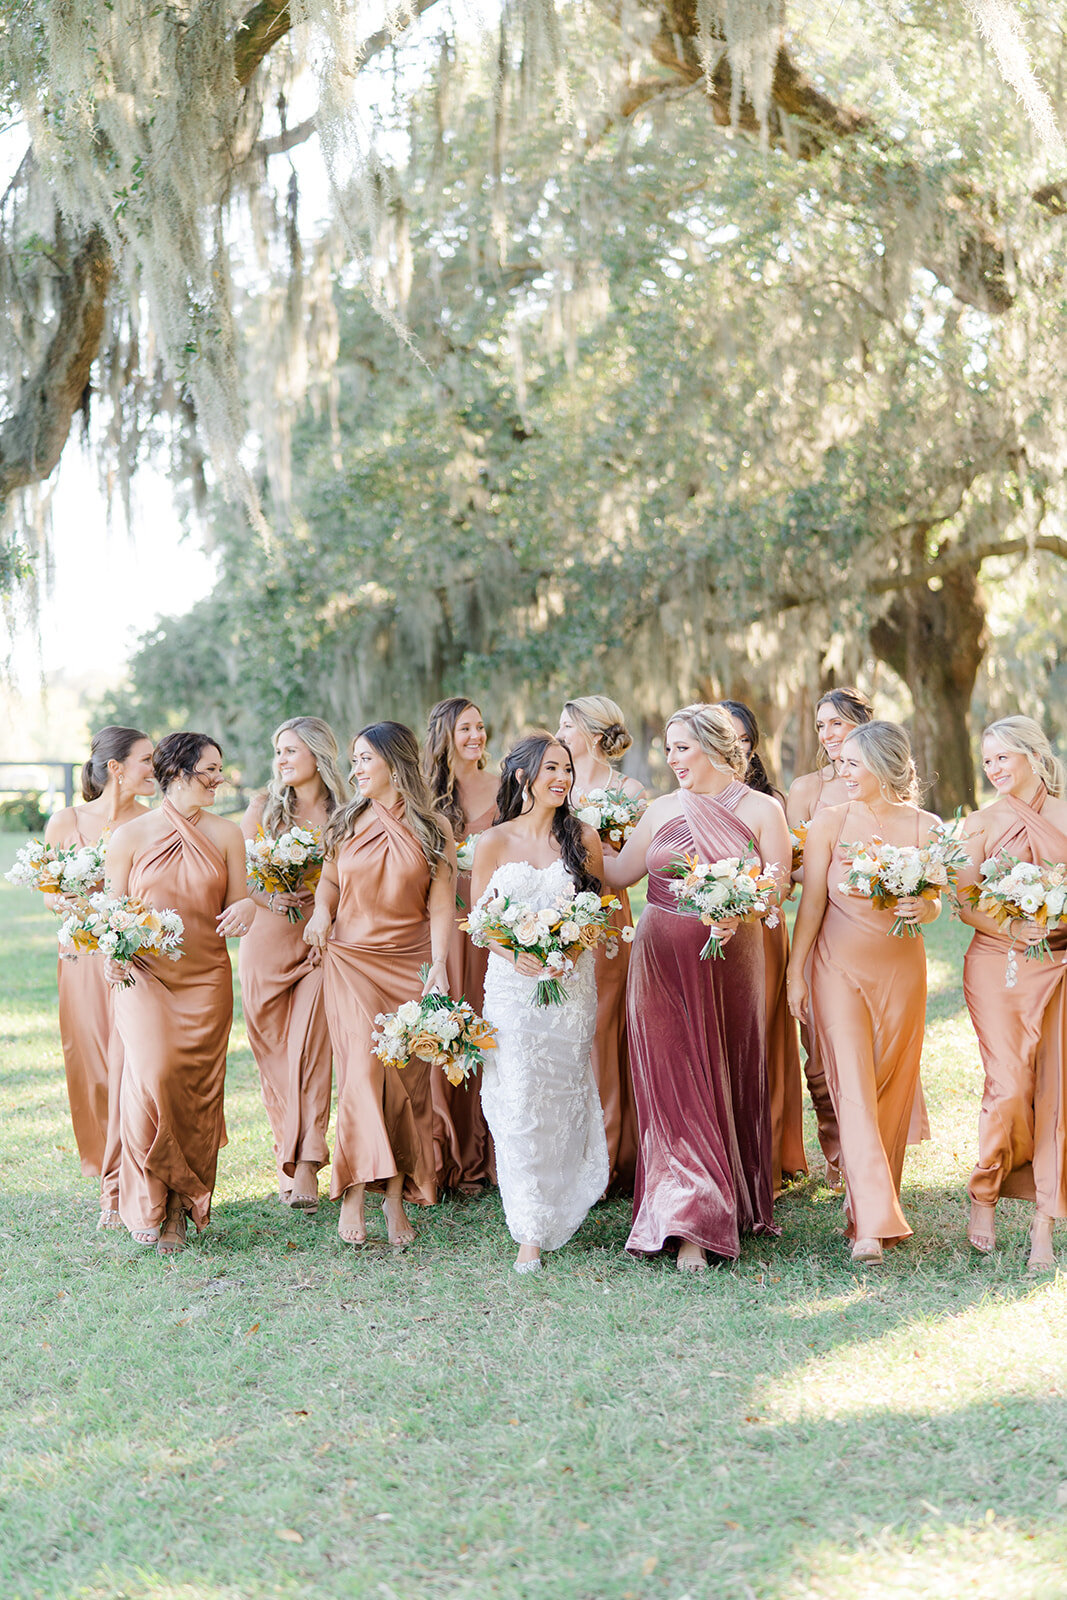 Jewel-toned bridesmaids dresses. Bride walking with bridesmaids on the lawn under spanish moss and live oaks. Fall wedding at Boone Hall.